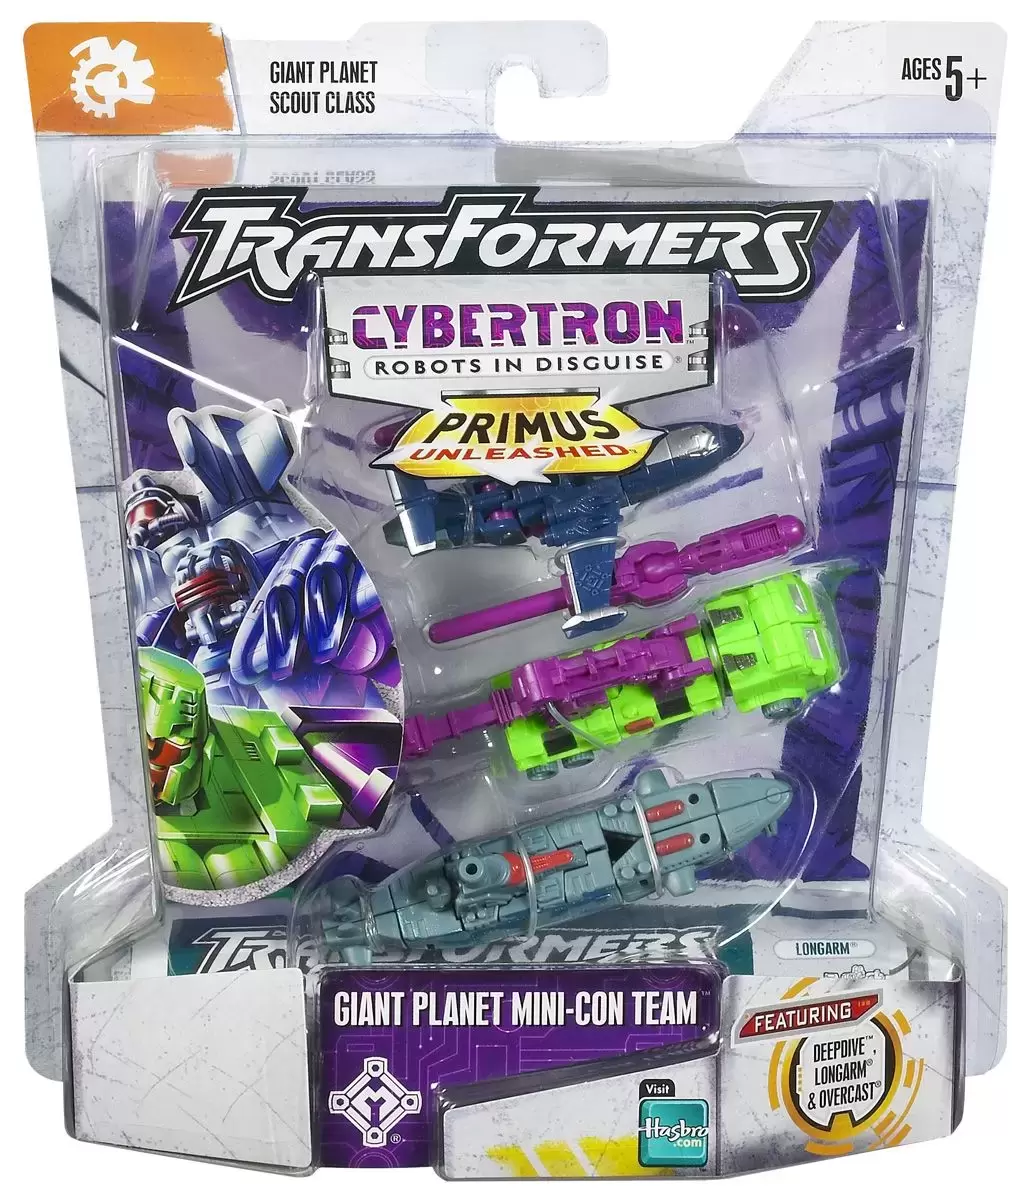 Transformers Cybertron Robots in Disguise - Giant Planet Mini-Con Team